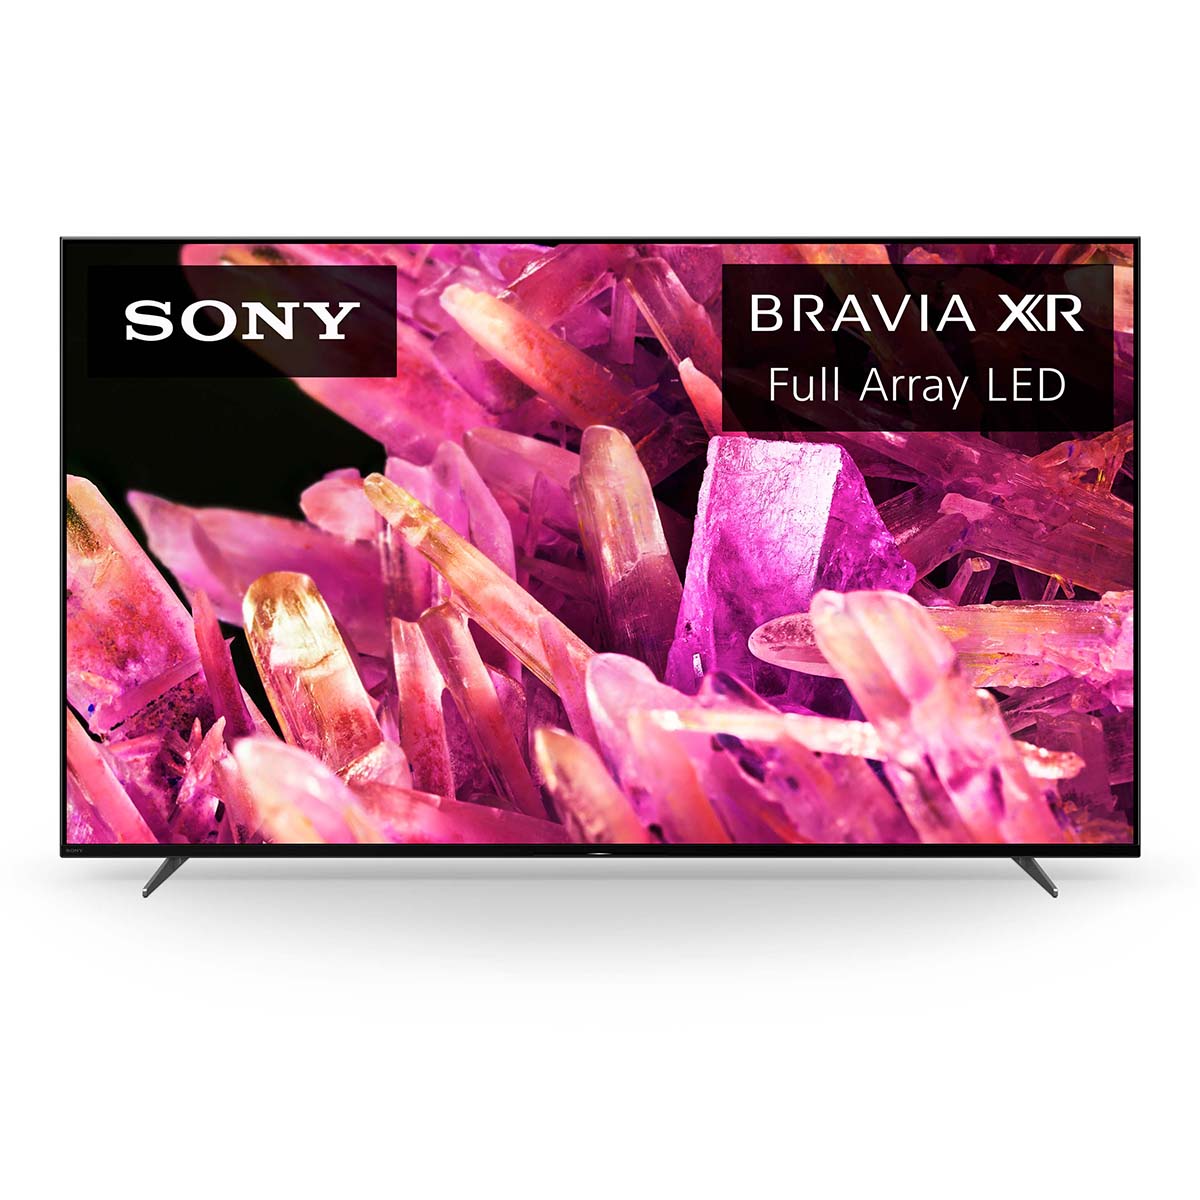 Watch this year's Super Bowl on a big screen for less! 1 x90k 65 sony bravia xr frnt 1 2